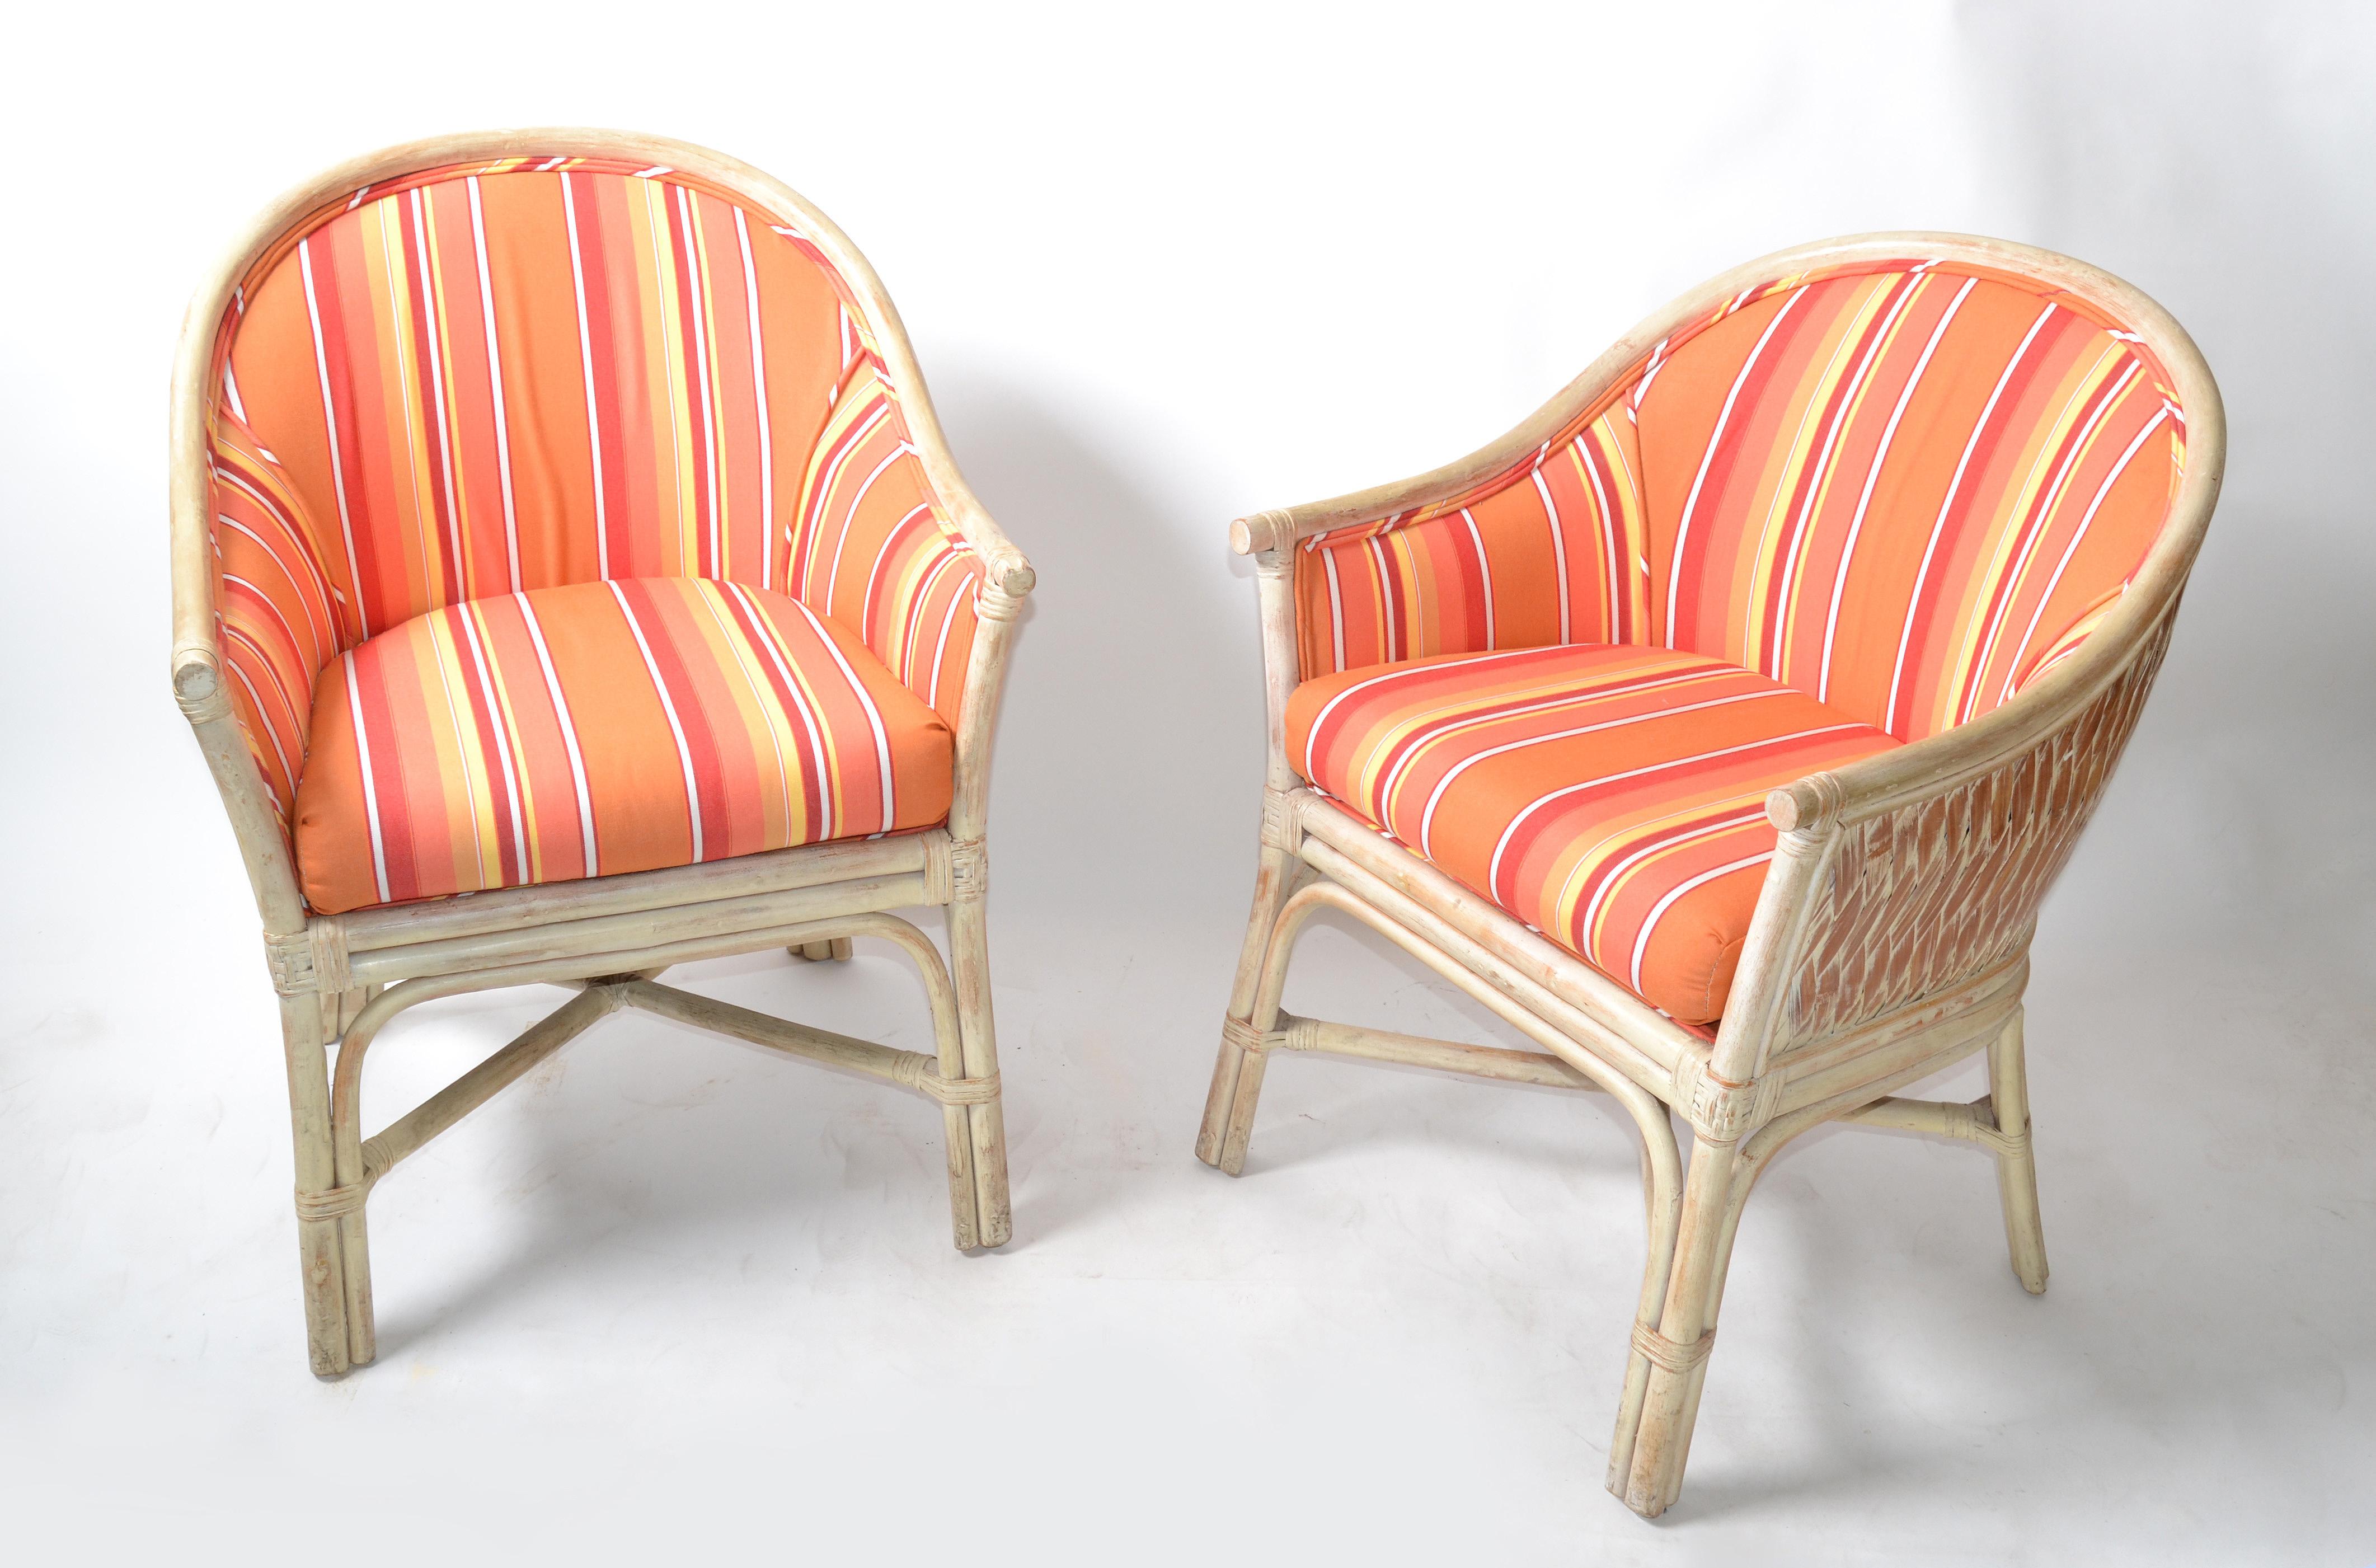 Hand-Crafted Pair, Mid-Century Modern Bamboo & Cane Armchair Orange Striped Upholstery, 1970 For Sale